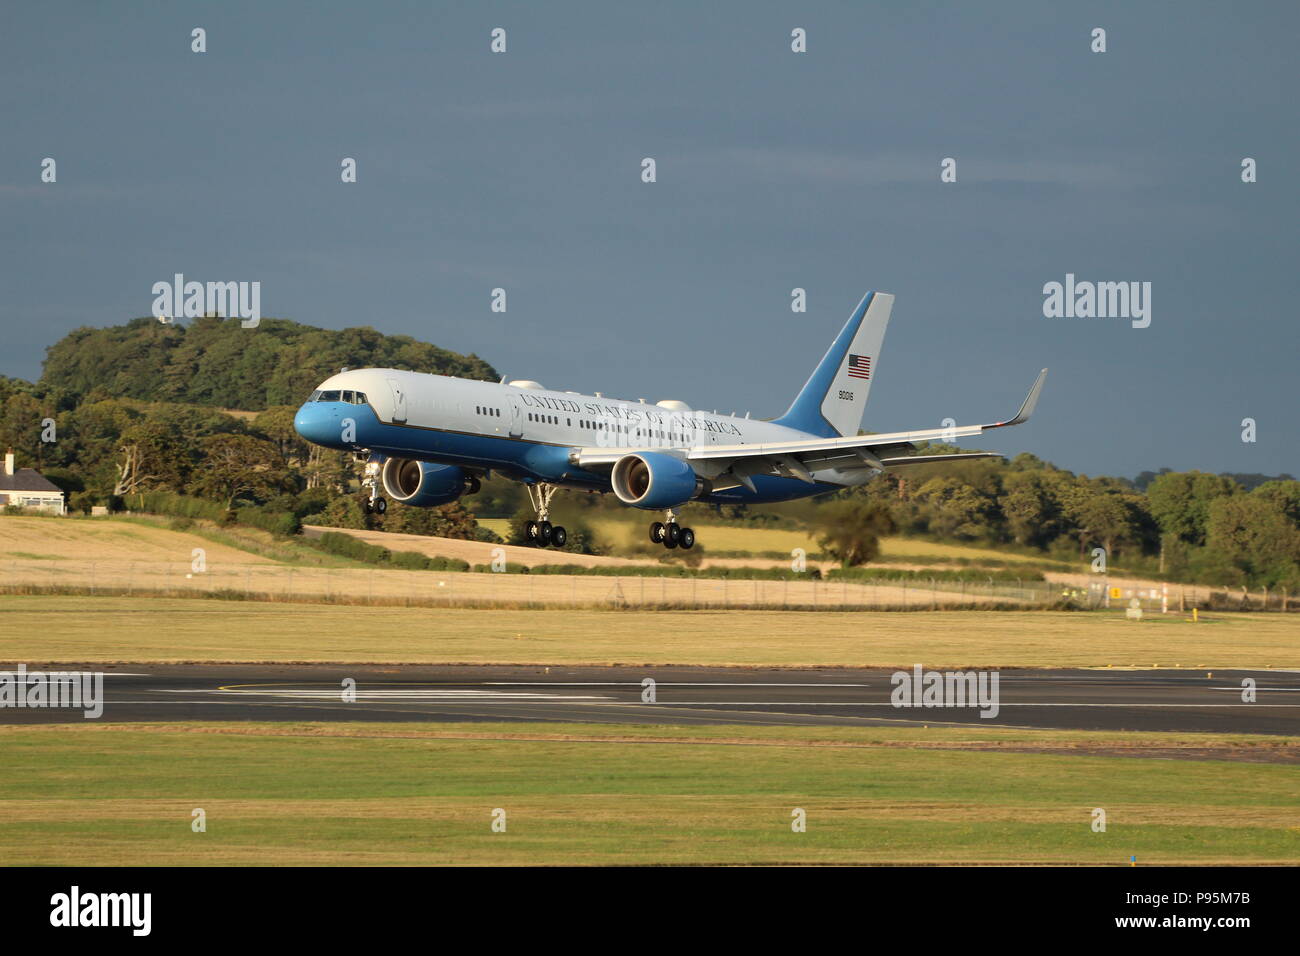 Shortly after President Donald Trump's arrival at Prestwick Airport in Ayrshire on Air Force 1, his entourage followed in this Boeing C-32 (09-0016). Stock Photo